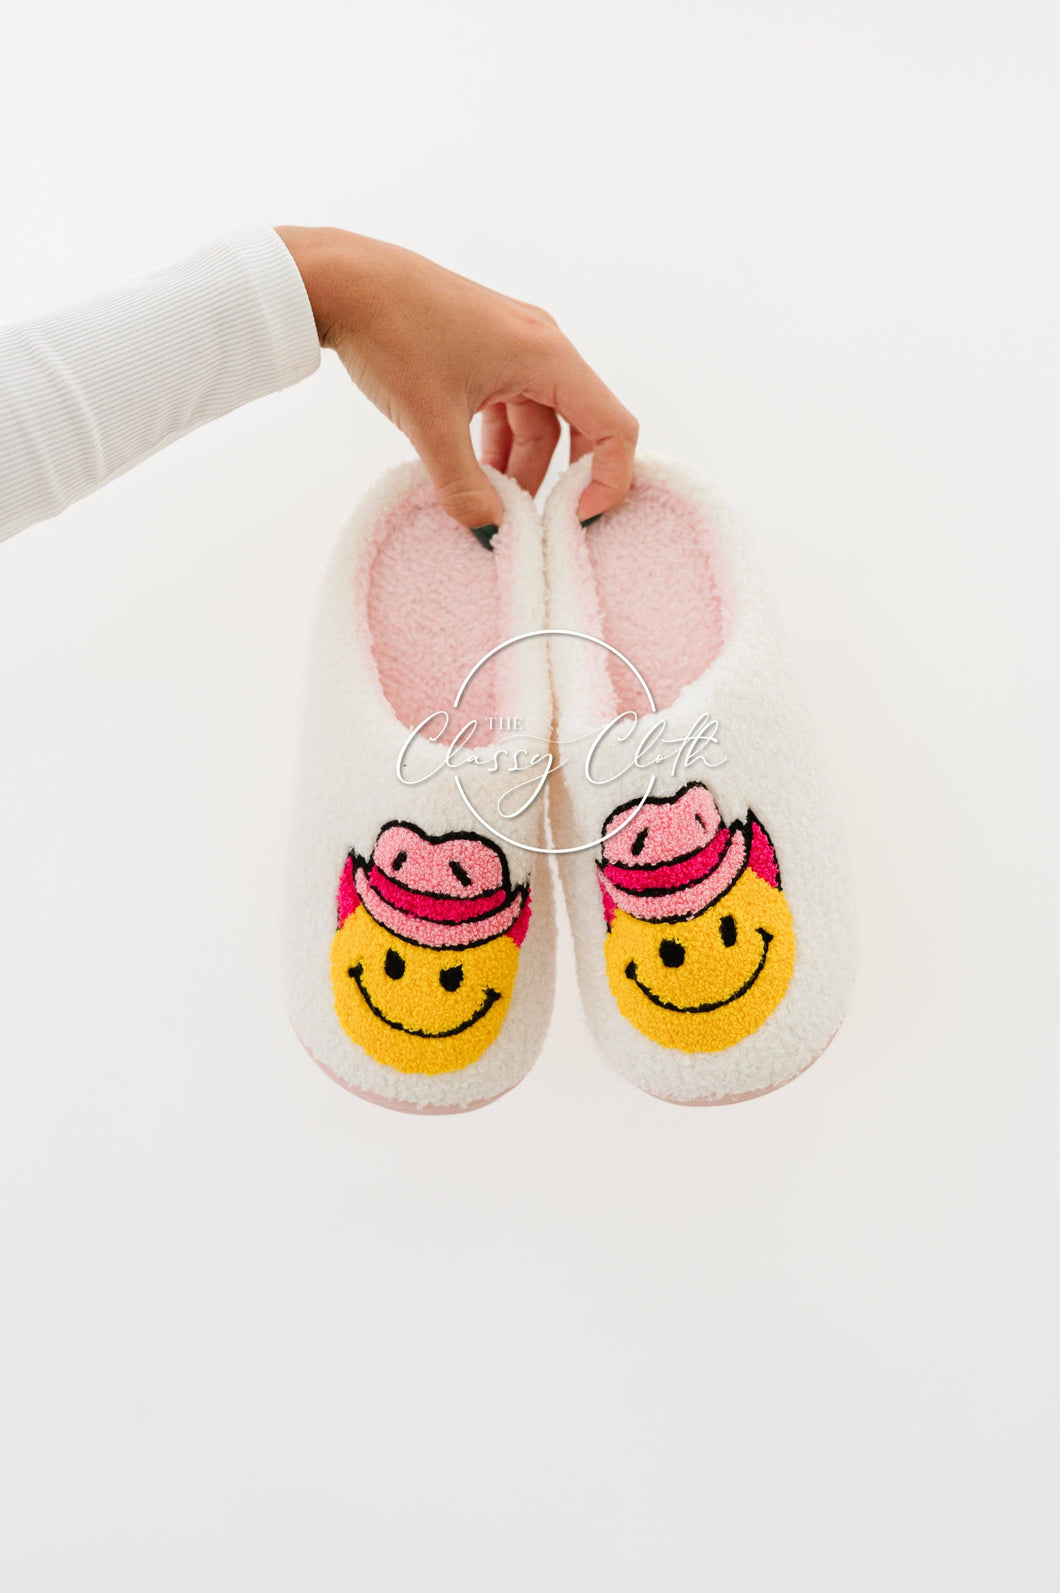 All Smiles Cowgirl Slippers